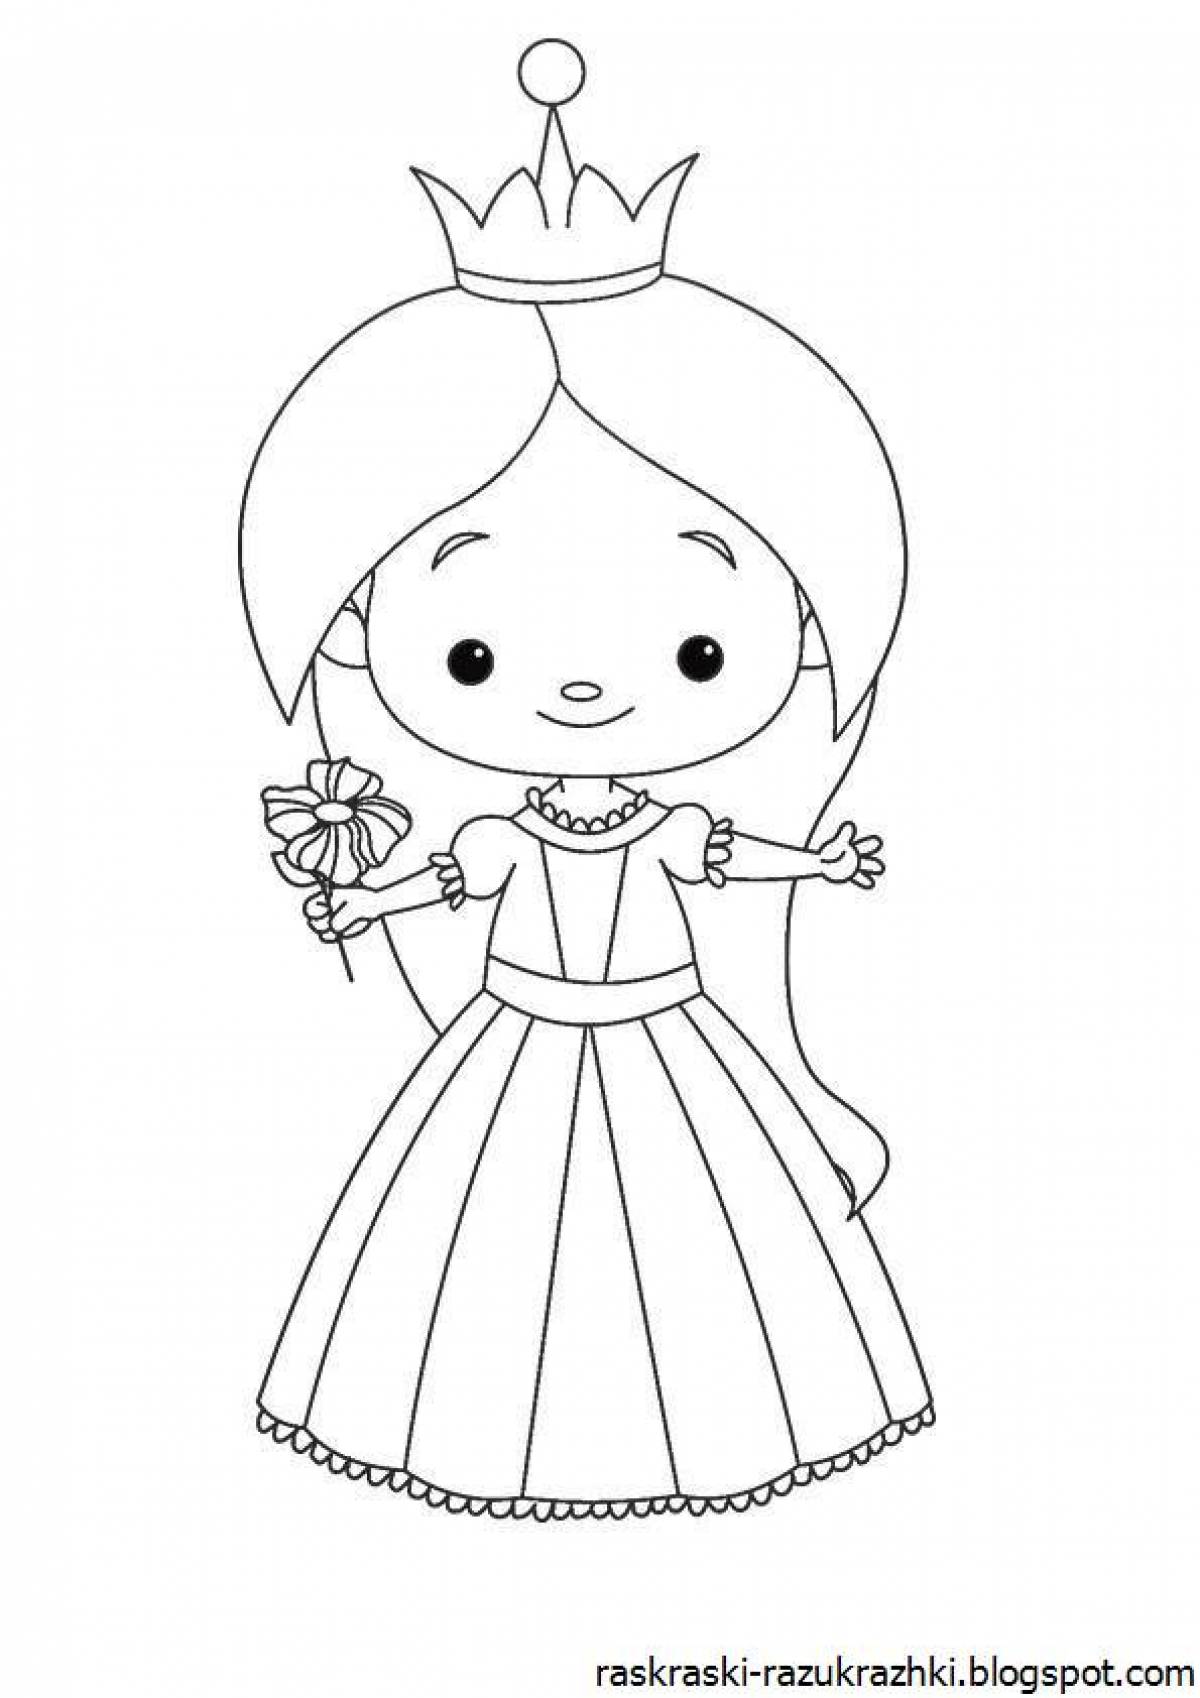 Royal coloring princess for children 5-6 years old